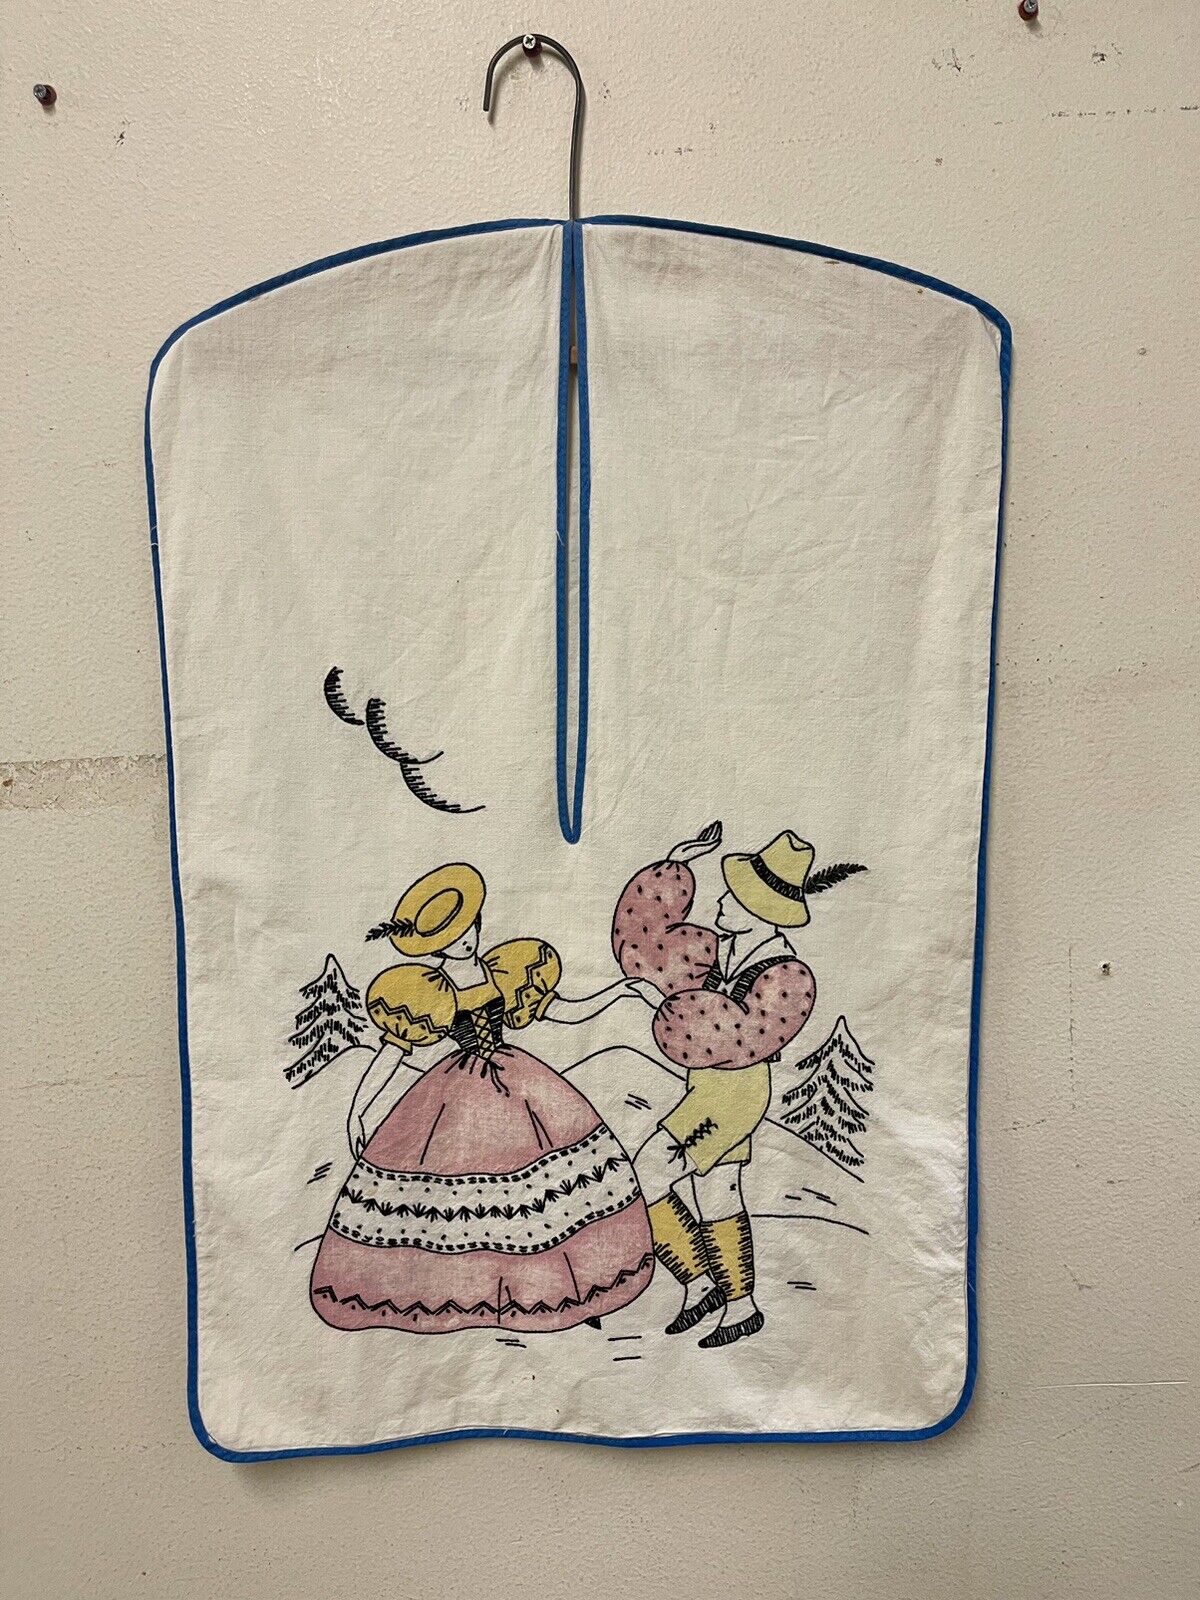 1940s Embroidered Hanging Hosiery Clothes Pin Bag Swiss Man Woman Dancing VTG